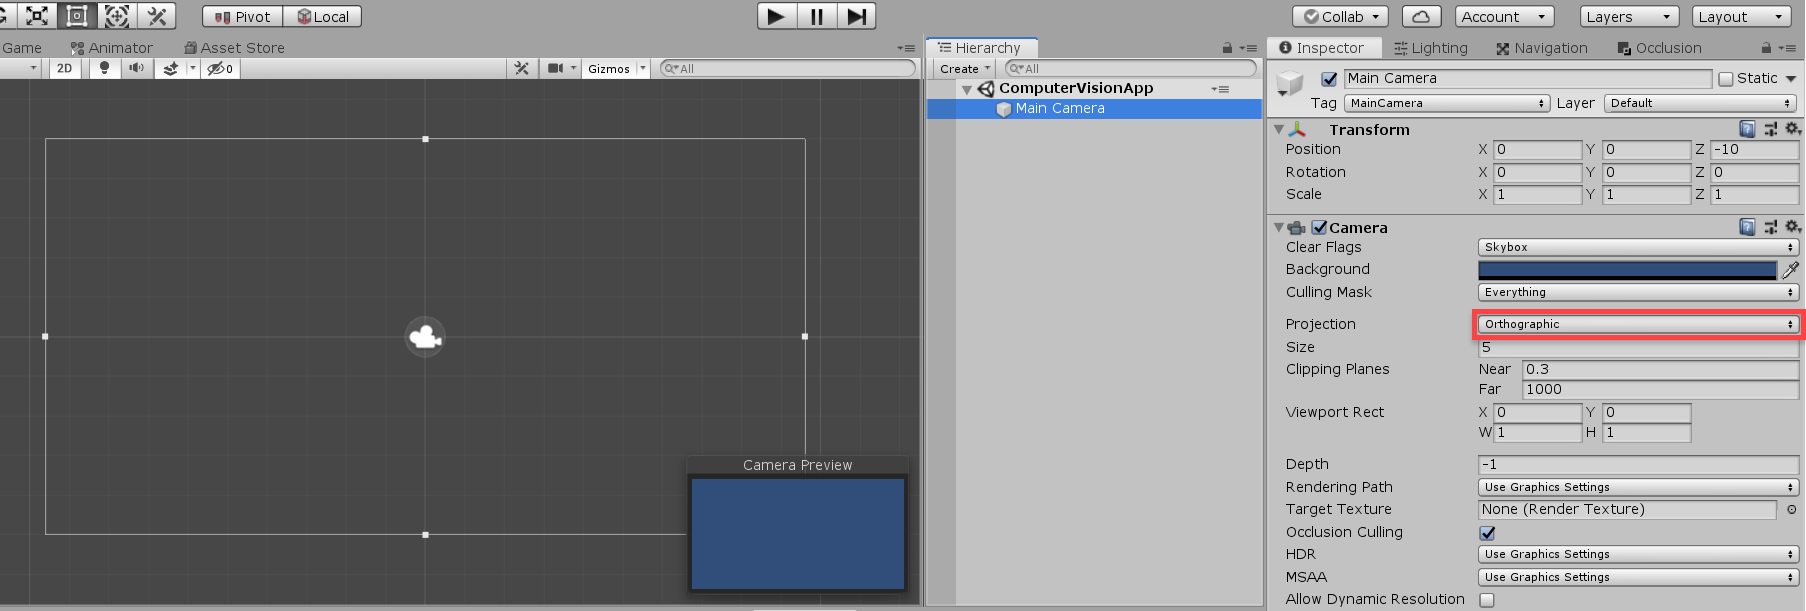 Unity Main Camera in the Inspector window